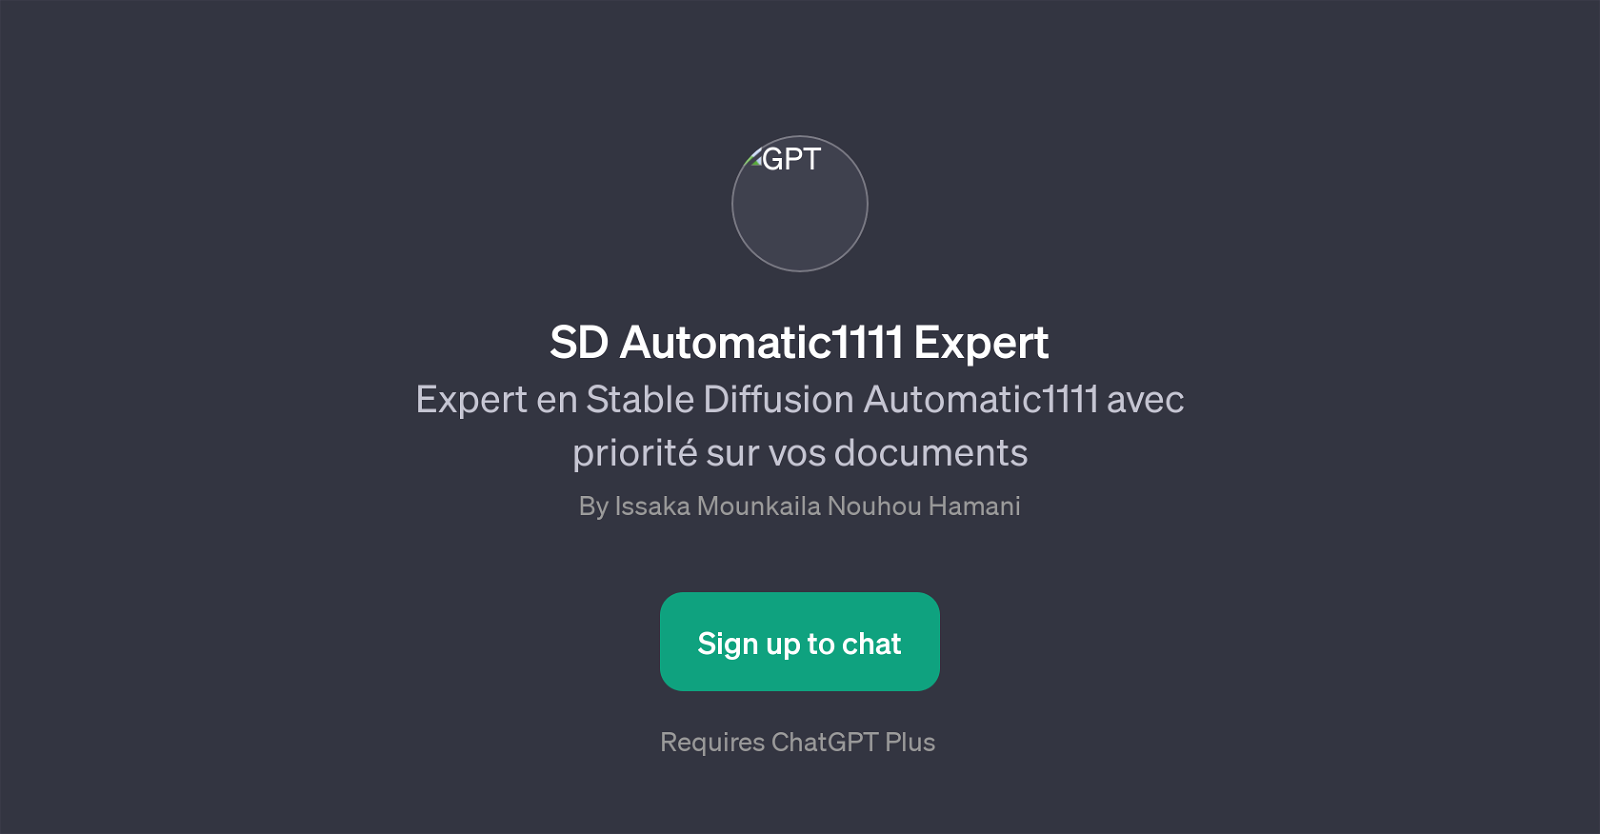 SD Automatic1111 Expert website